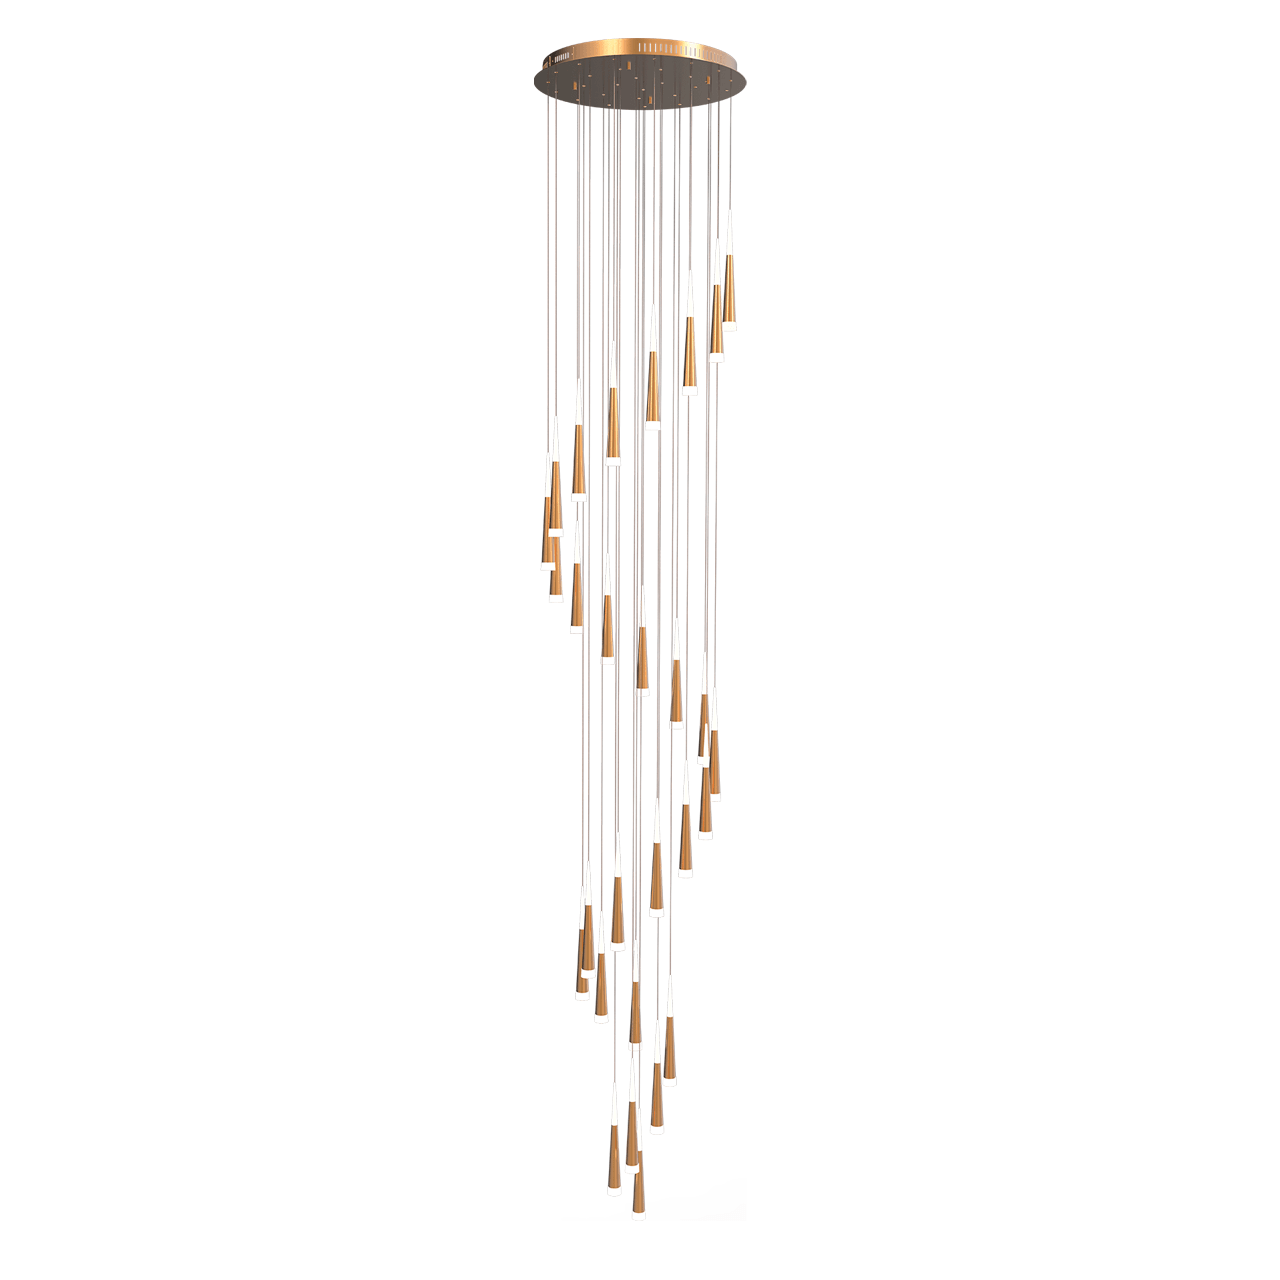 Pageone - Meteor (28) 118.1" . Chandelier - Hbdepot